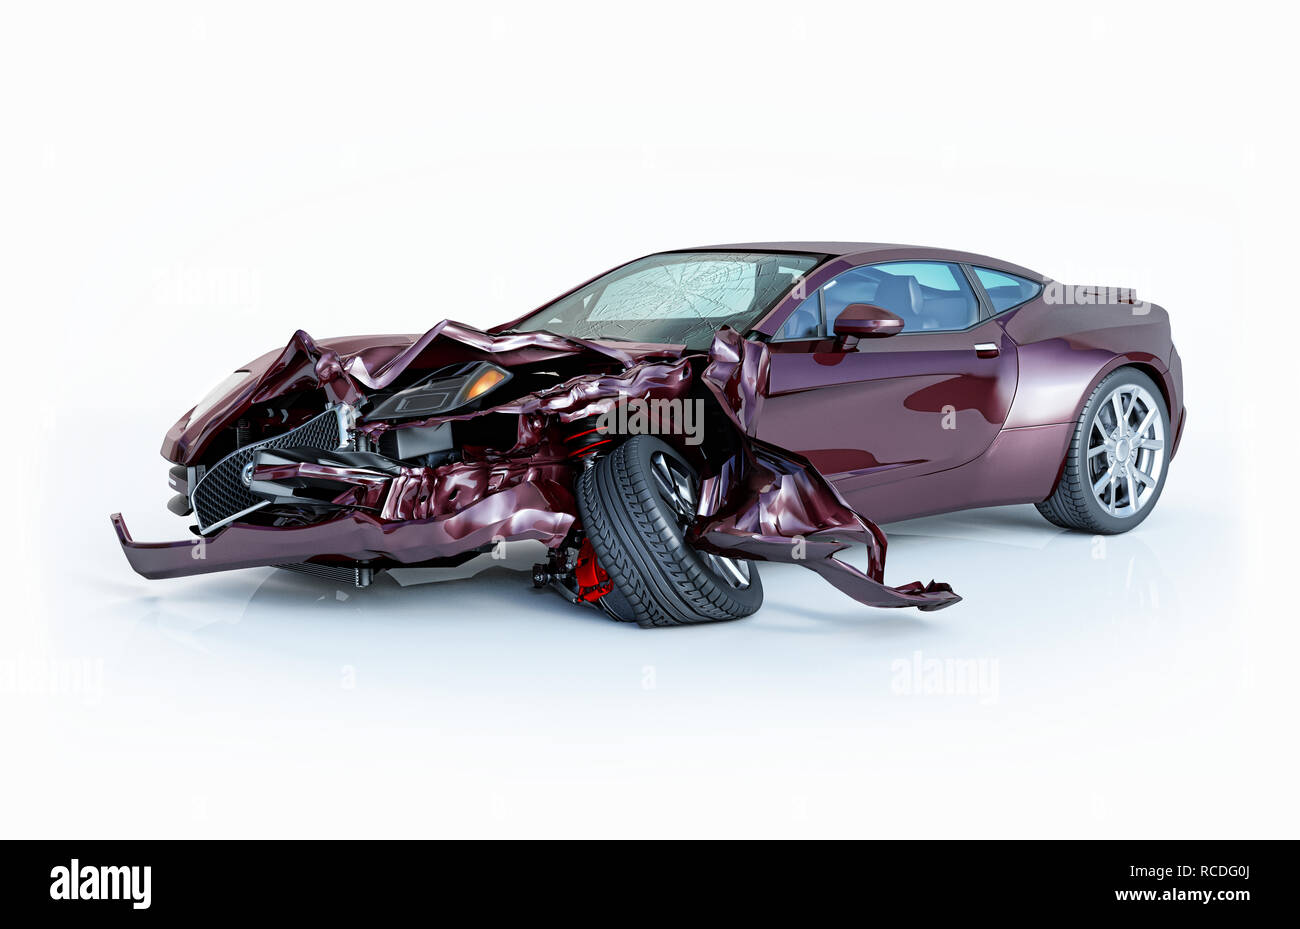 Single car crashed. Purple sport car coupé havily damaged on the front part. Isolated on white background. Perspective view. Stock Photo